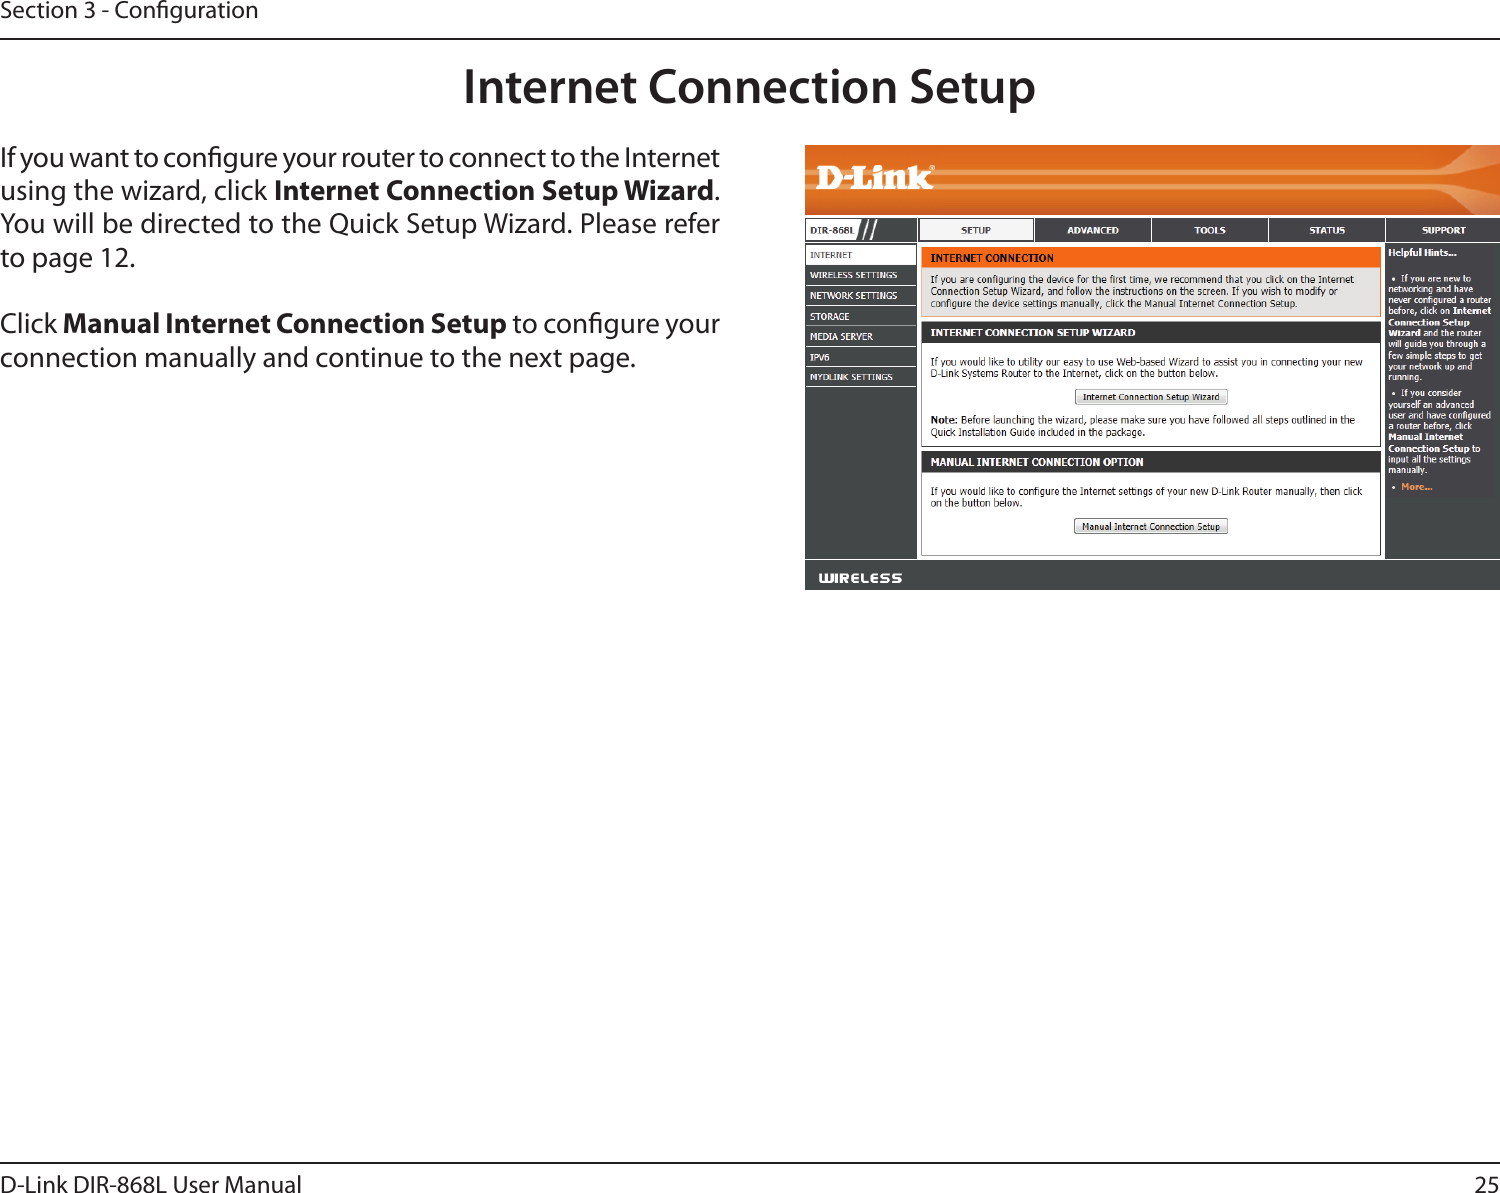 25D-Link DIR-868L User ManualSection 3 - CongurationInternet Connection SetupIf you want to congure your router to connect to the Internet using the wizard, click Internet Connection Setup Wizard. You will be directed to the Quick Setup Wizard. Please refer to page 12.Click Manual Internet Connection Setup to congure your connection manually and continue to the next page.